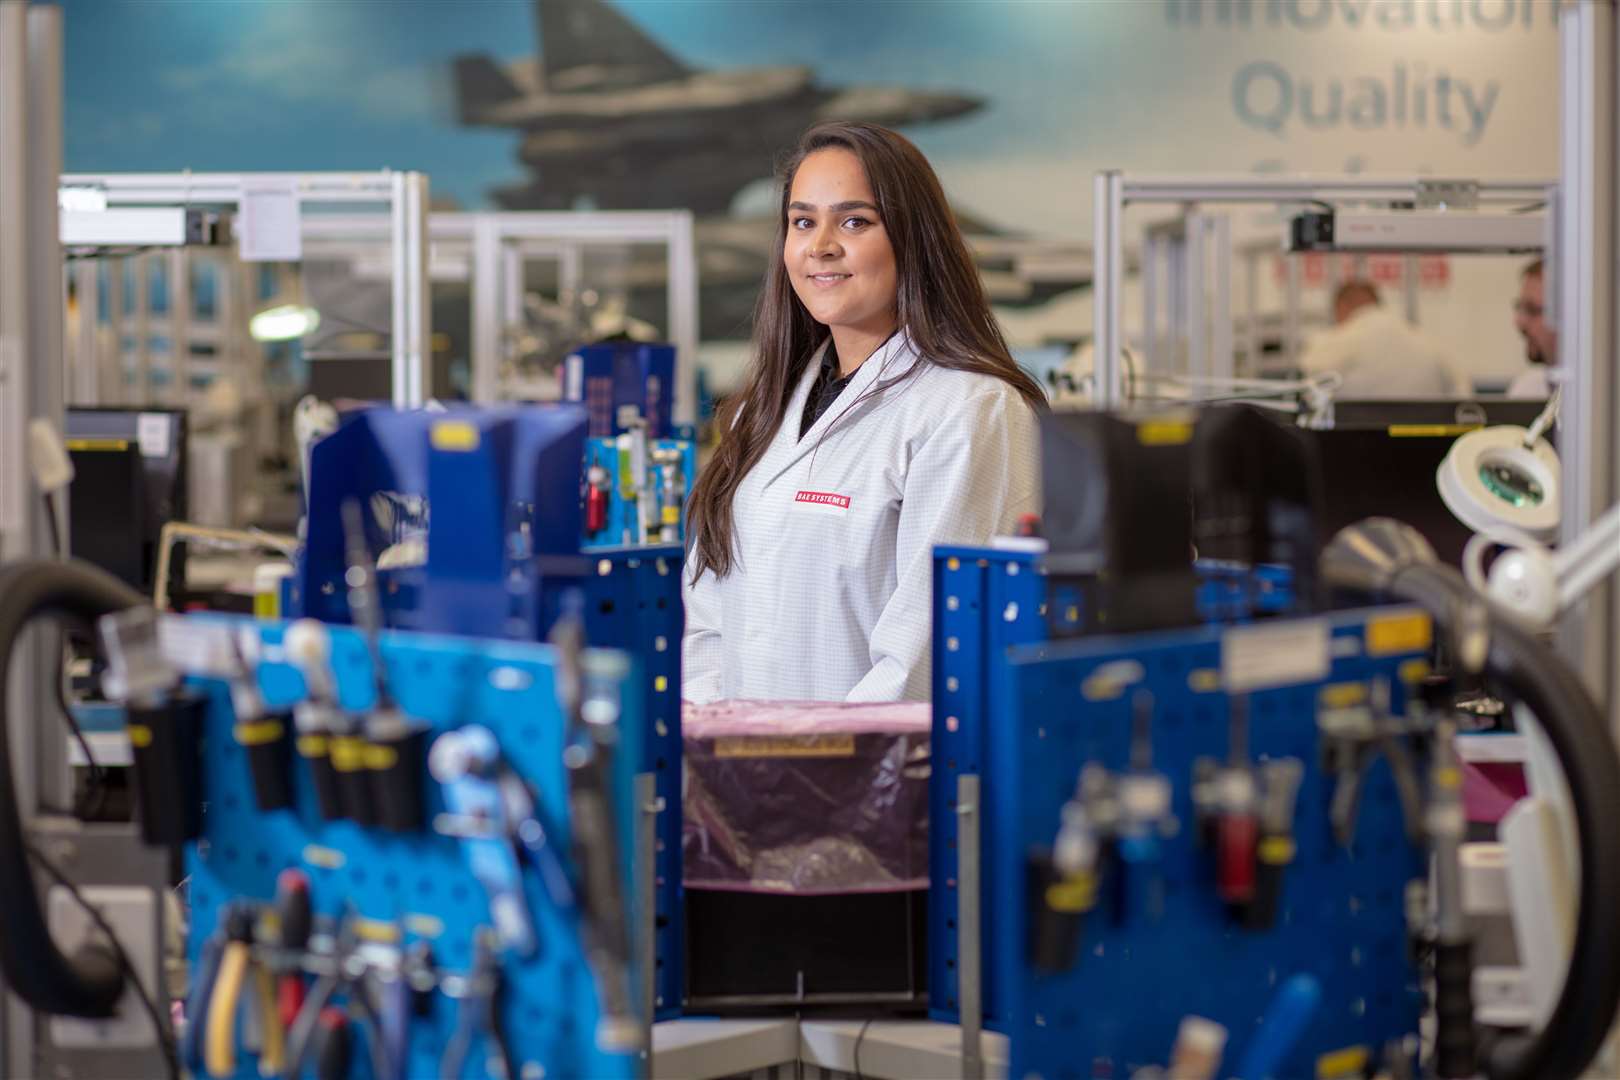 Billie Sequeira, 21, has been named one of Europes top 100 most influential women in engineering for her work at BAE Systems, in Marconi Way, Rochester. Pic: David Baird (19880518)